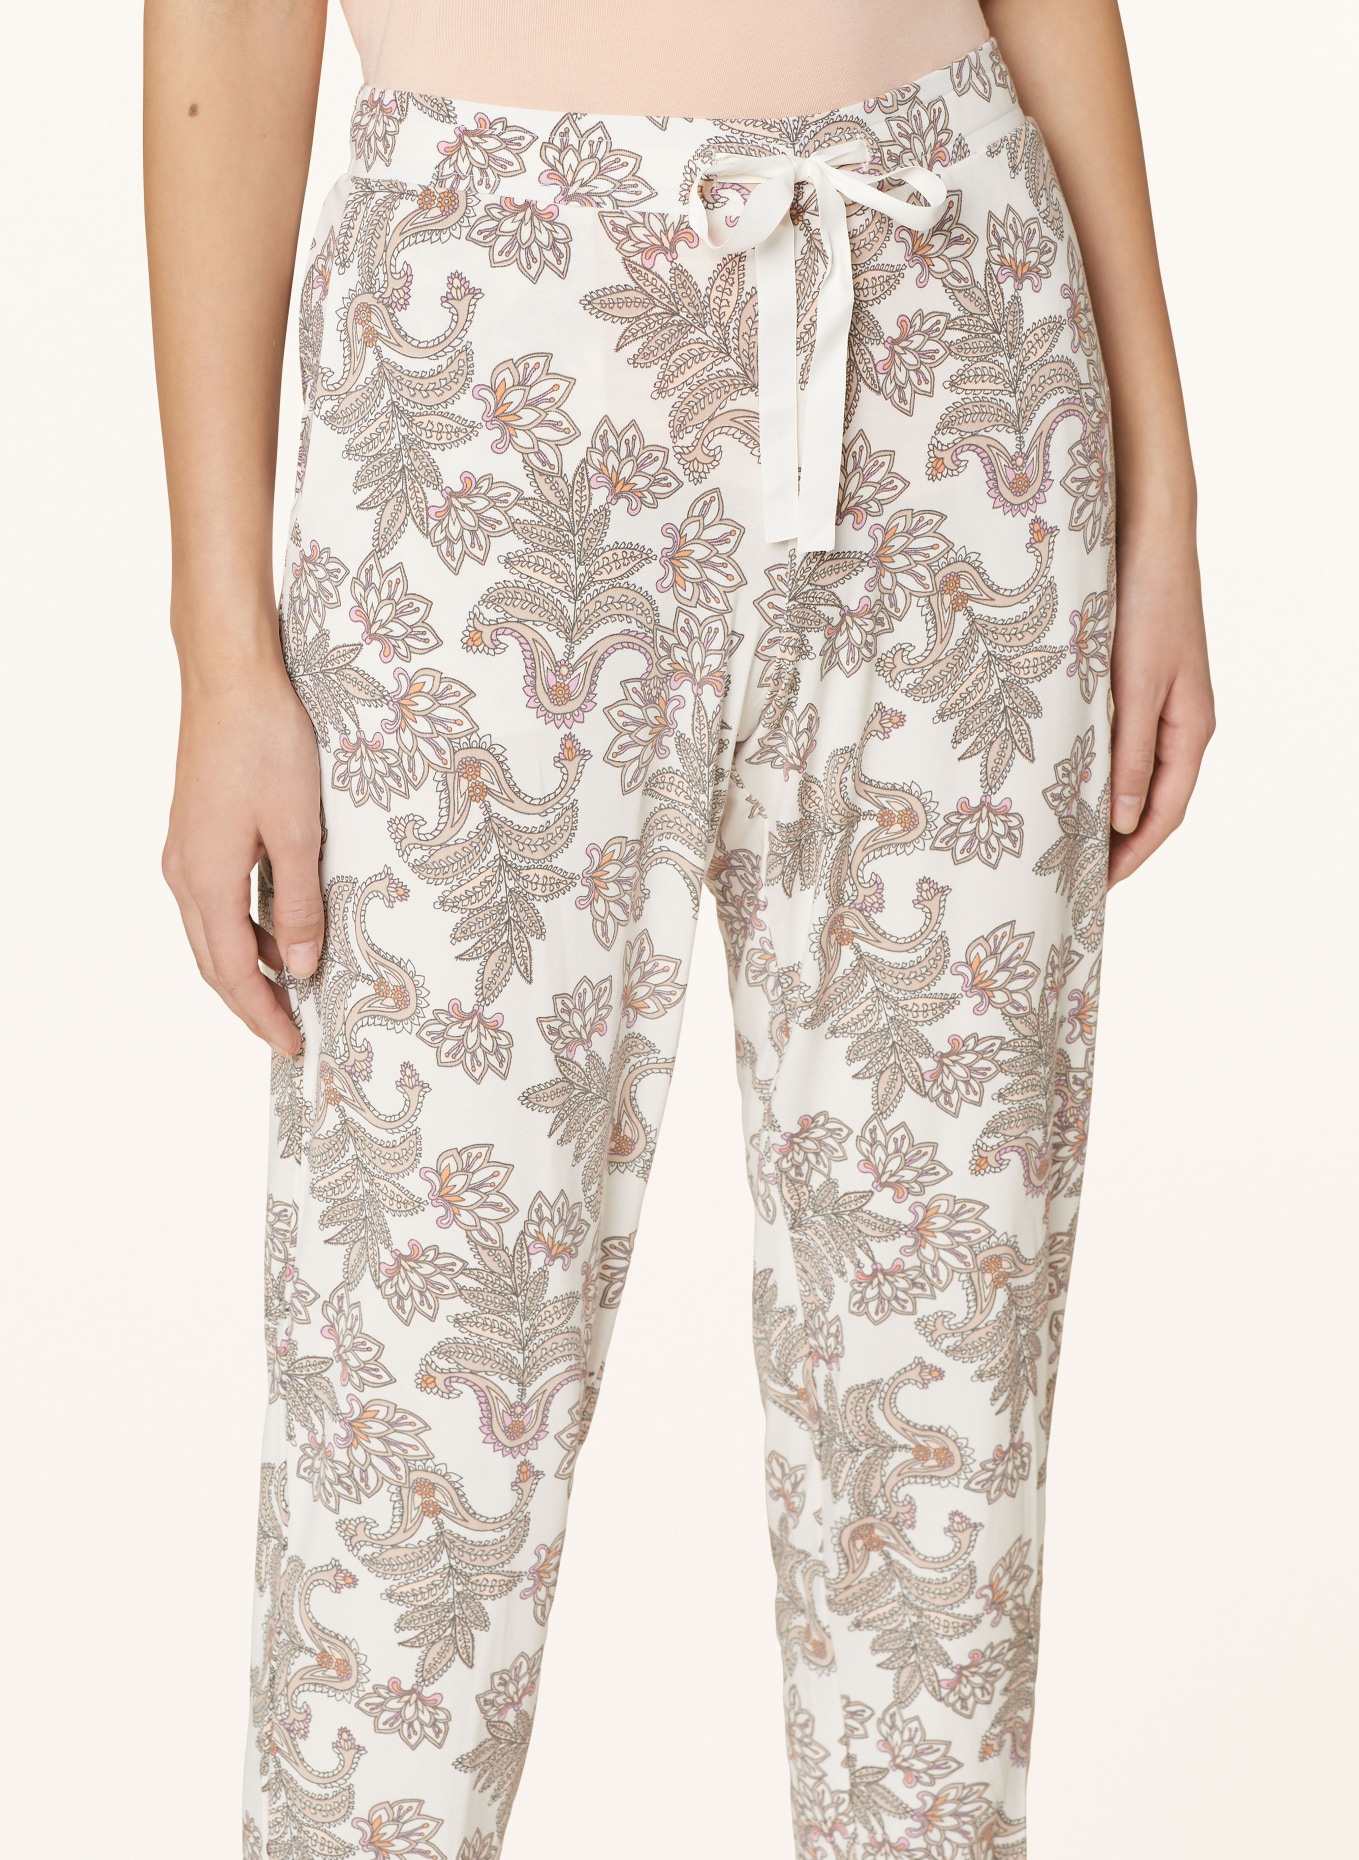 SCHIESSER Lounge pants MIX+RELAX, Color: CREAM/ BEIGE (Image 5)